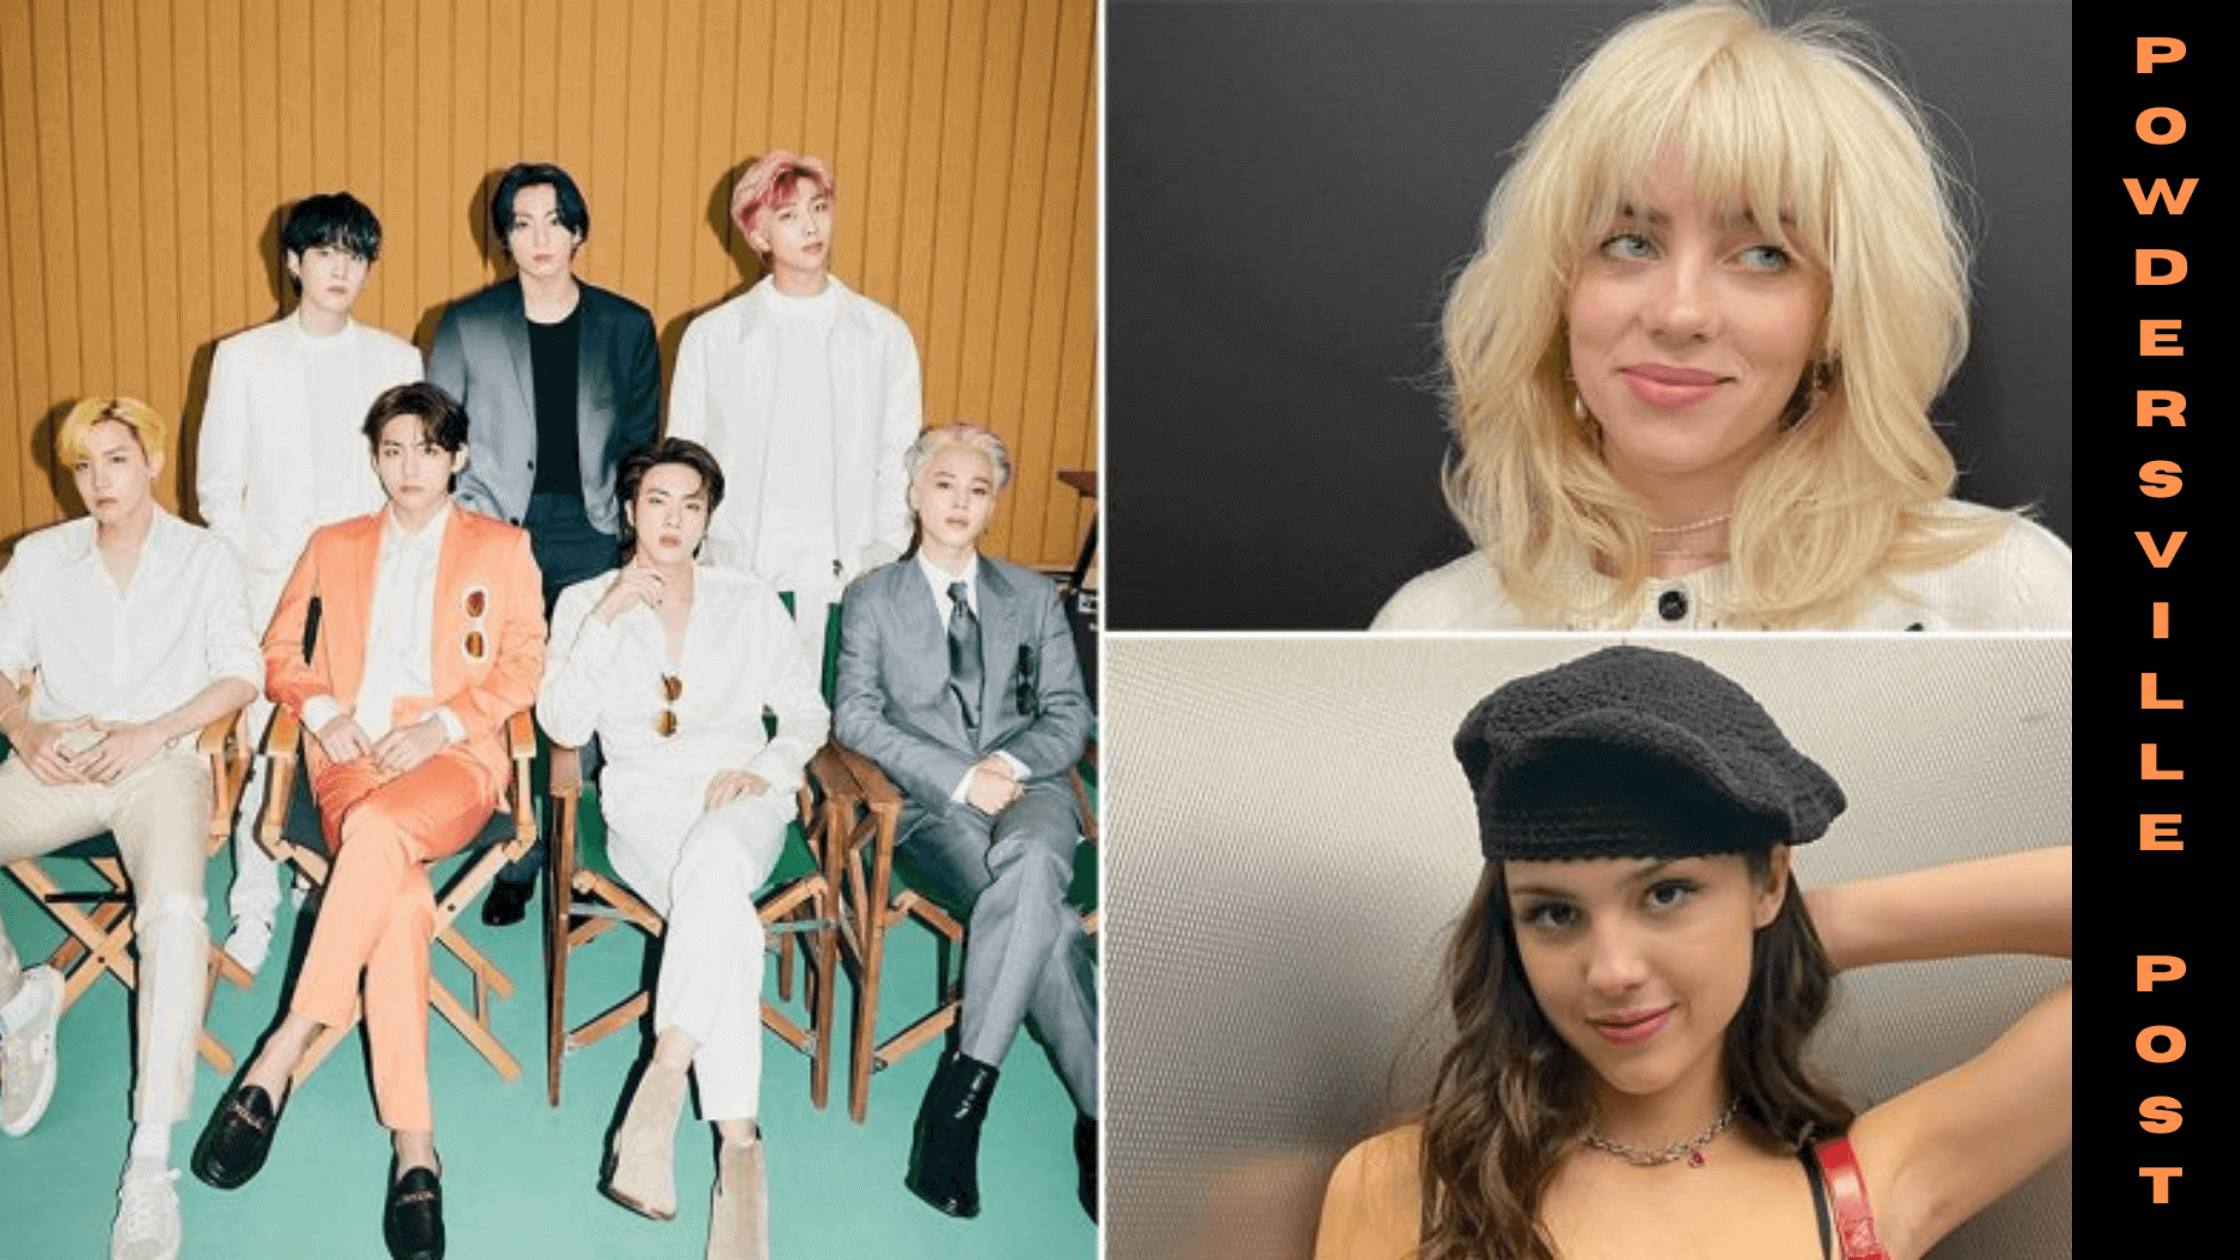 The 2022 Grammys Will Feature Performances By Olivia Rodrigo, Billie Eilish, BTS, And More